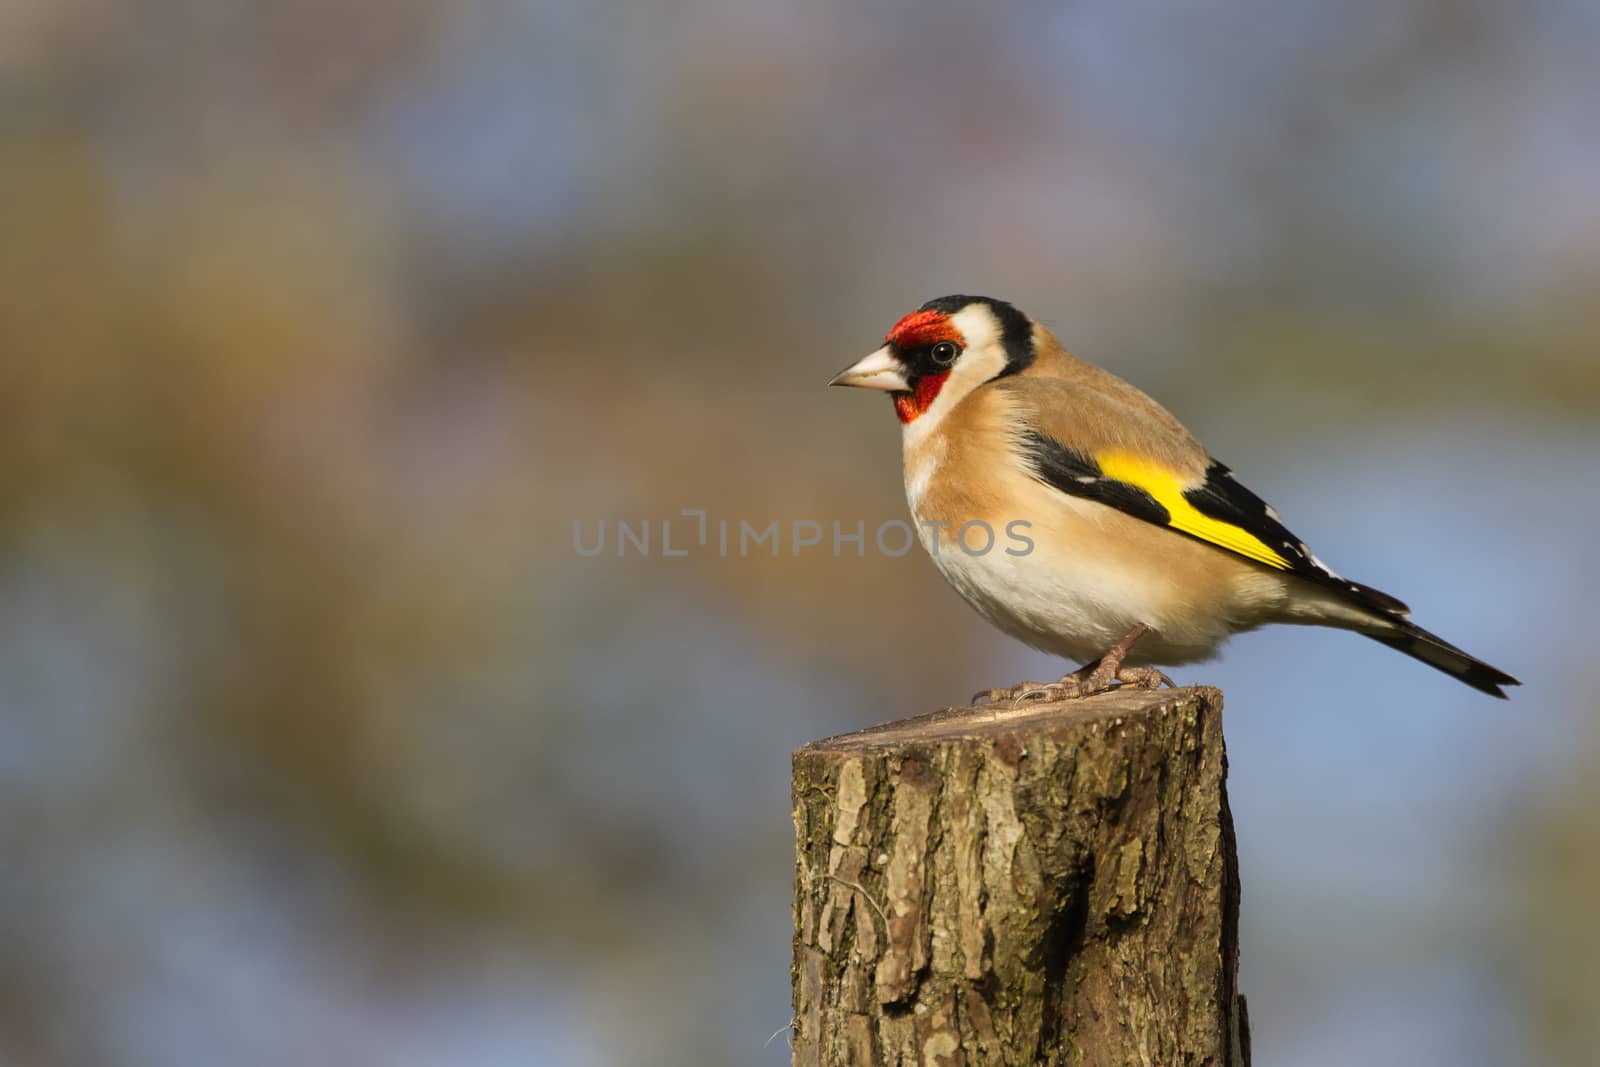 Goldfinch (Carduelis Carduelis) perched on Stalk